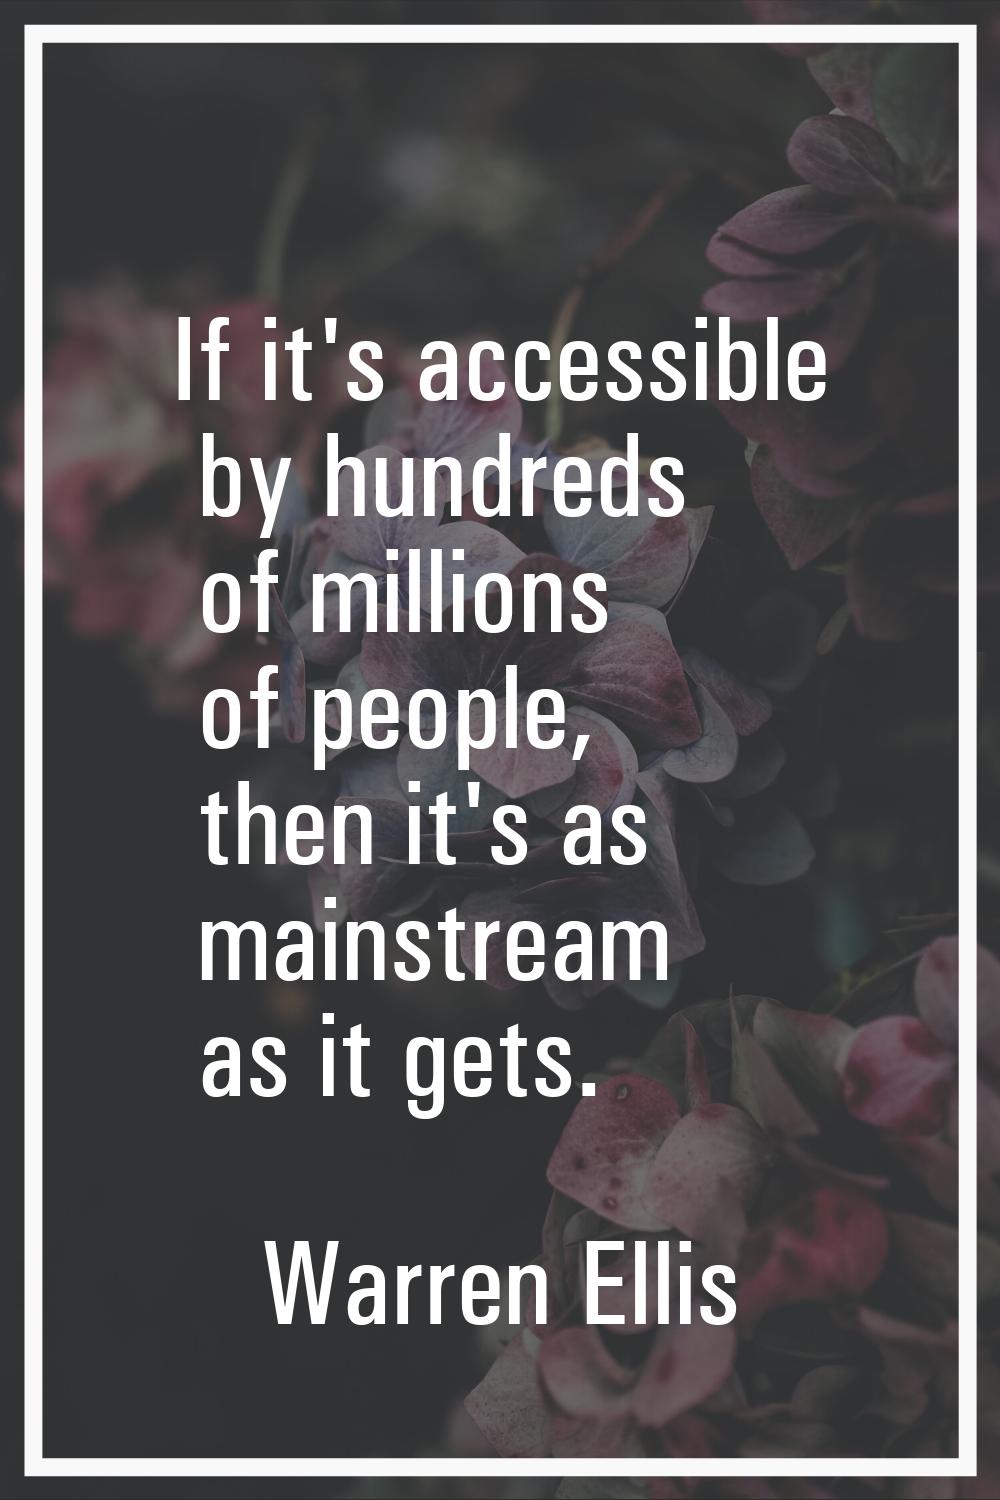 If it's accessible by hundreds of millions of people, then it's as mainstream as it gets.